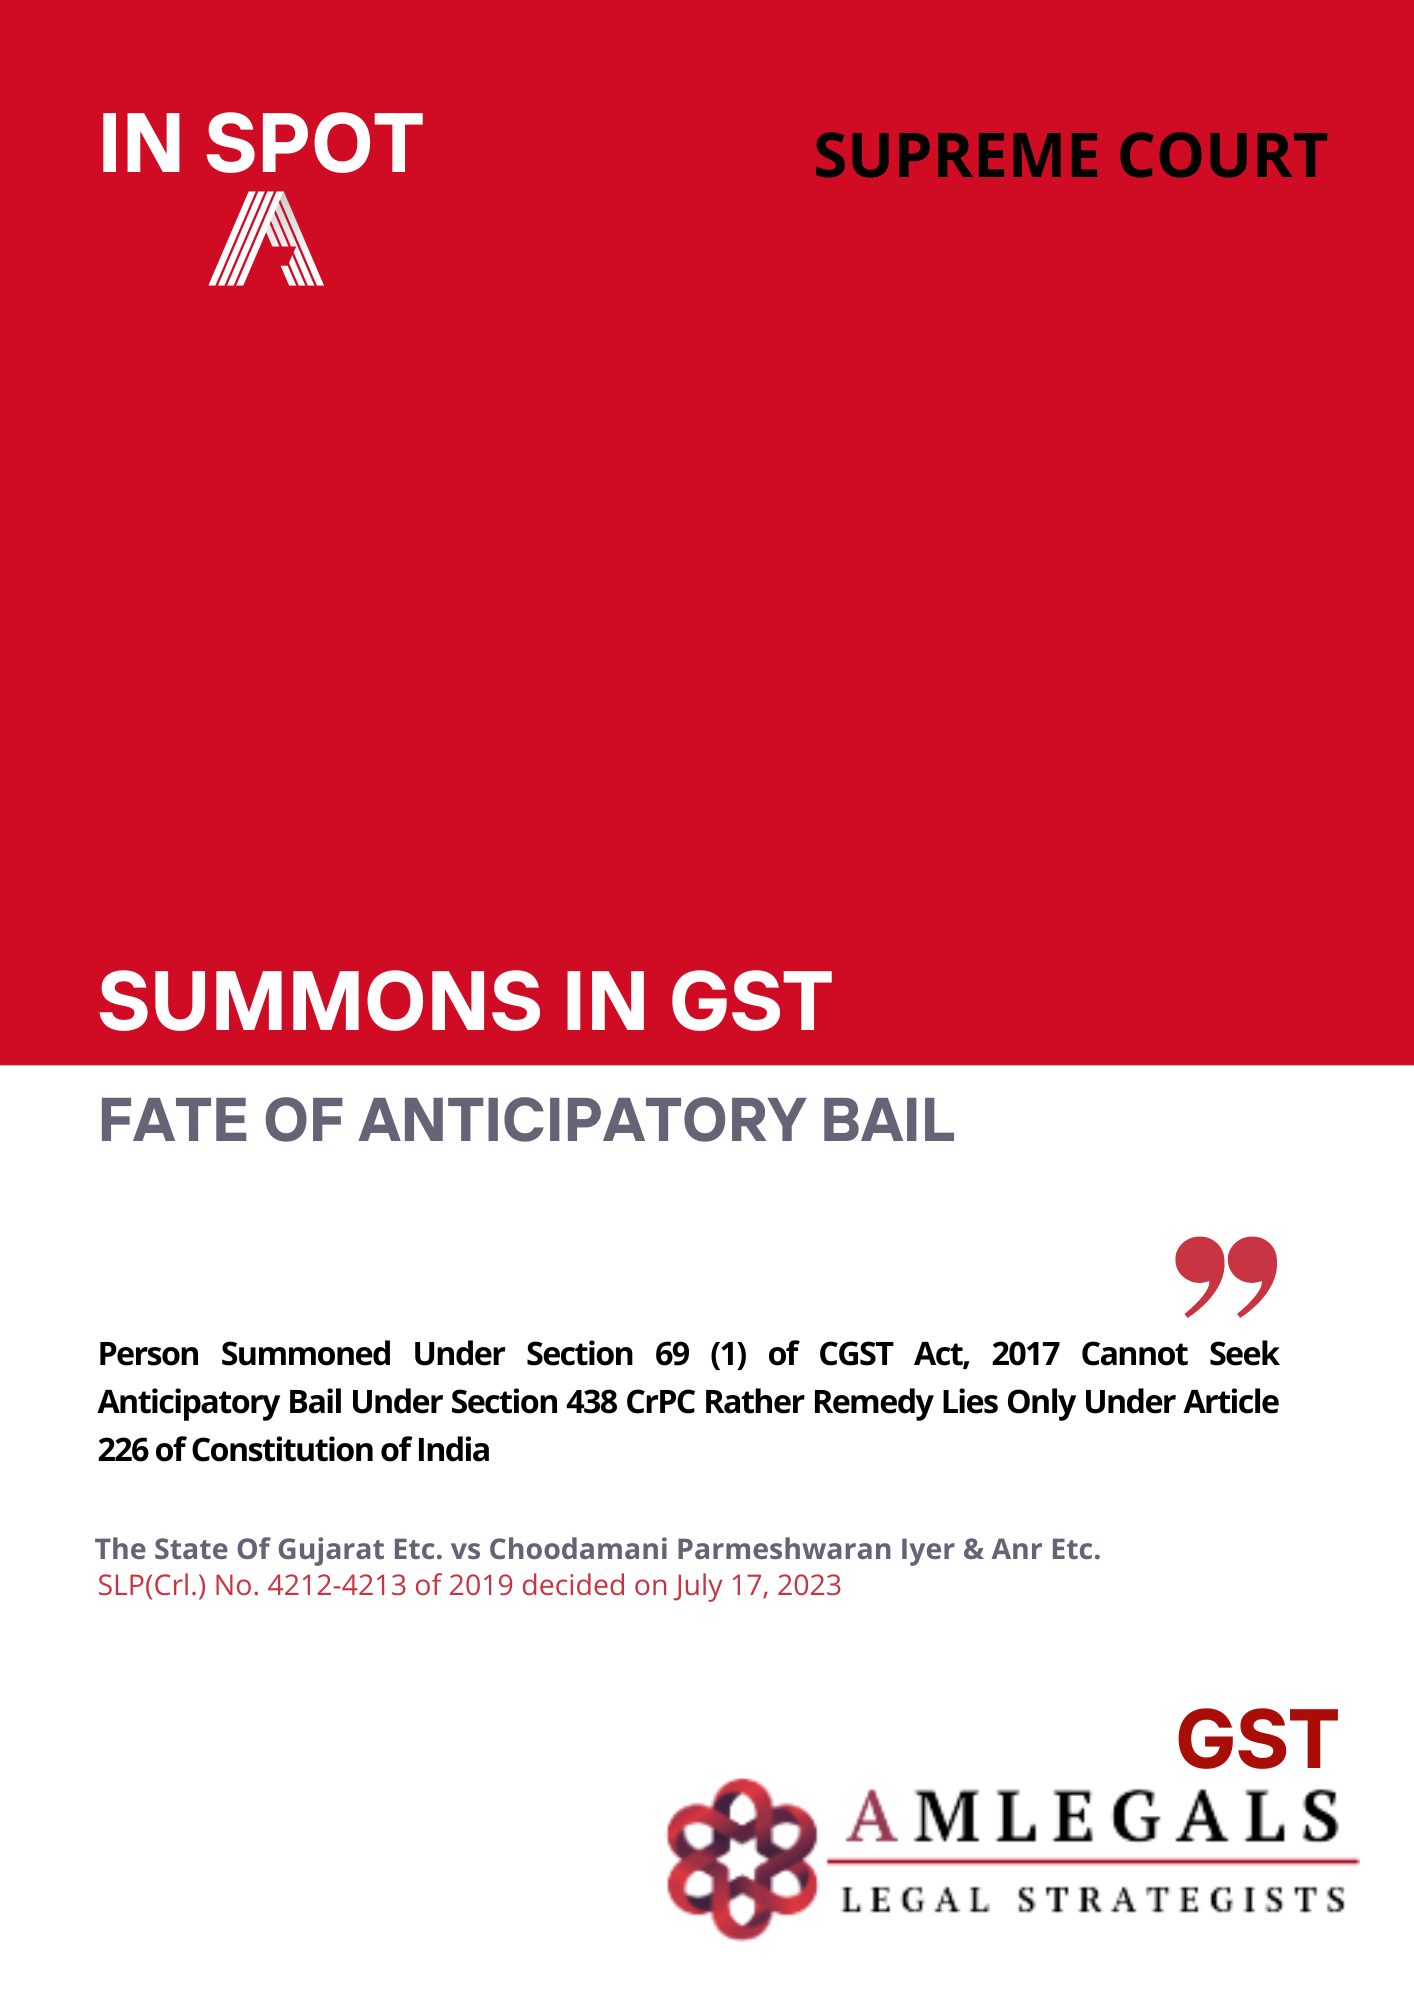 Summons in GST - Fate of Anticipatory Bail